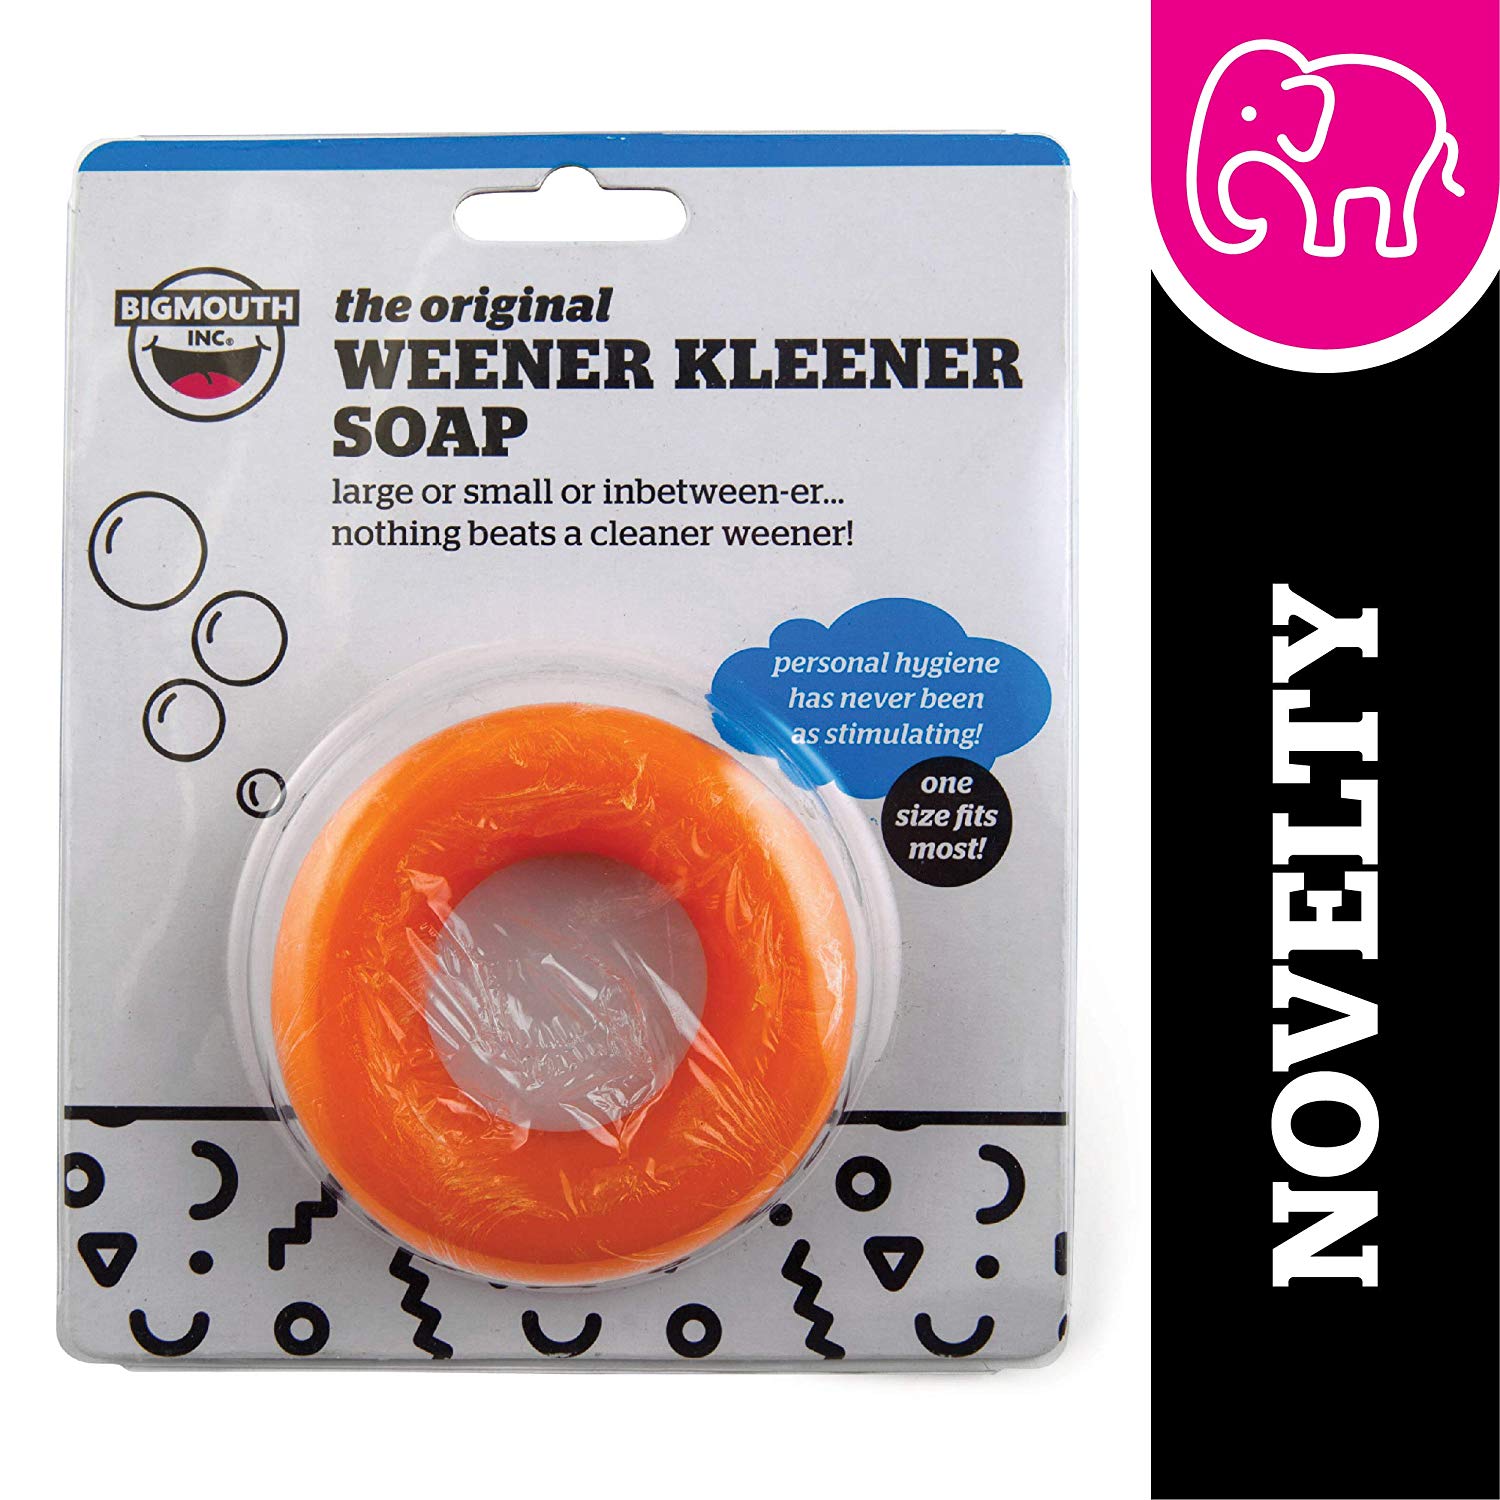 Because nothing beats a cleaner wiener! Get it for <a href="https://amzn.to/2LrGJ7T">$9.99</a>.